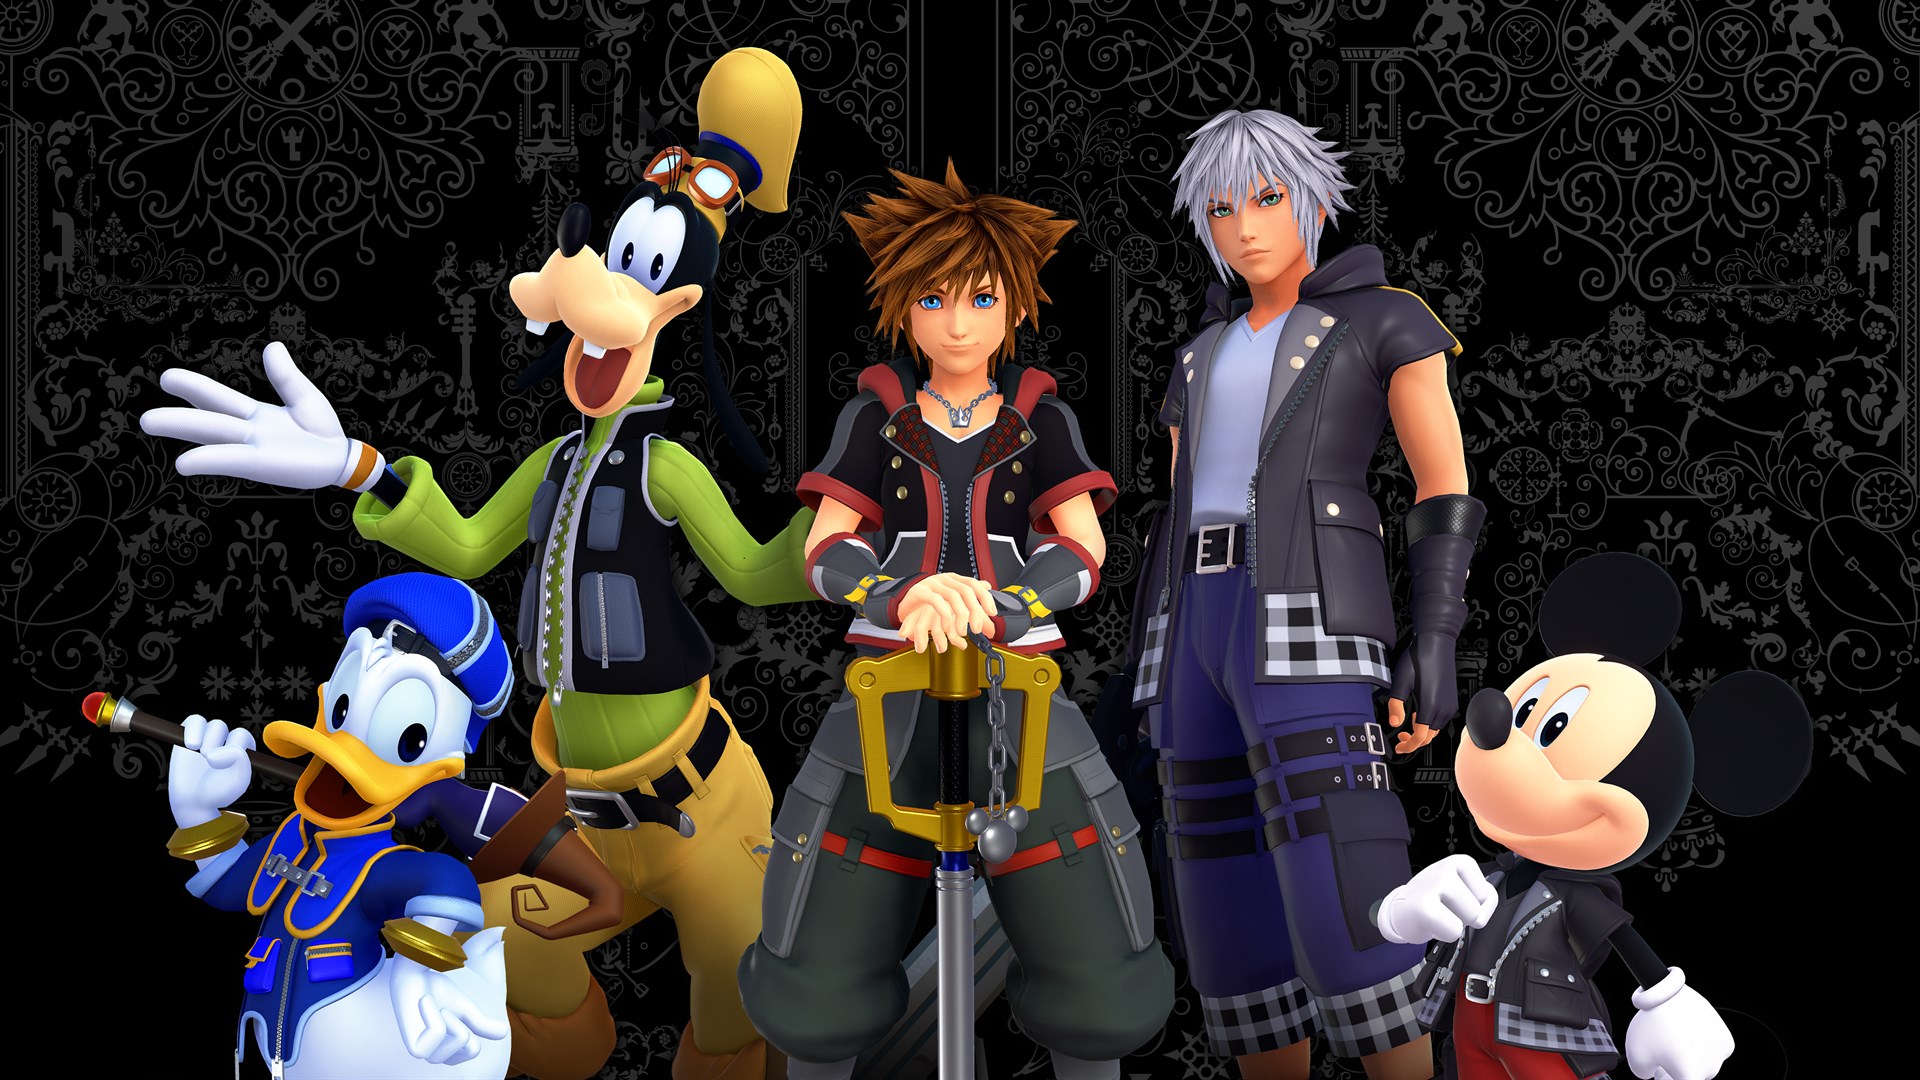 Kingdom Hearts Iii Soundtrack Release Date Price And Editions Announced The Mako Reactor